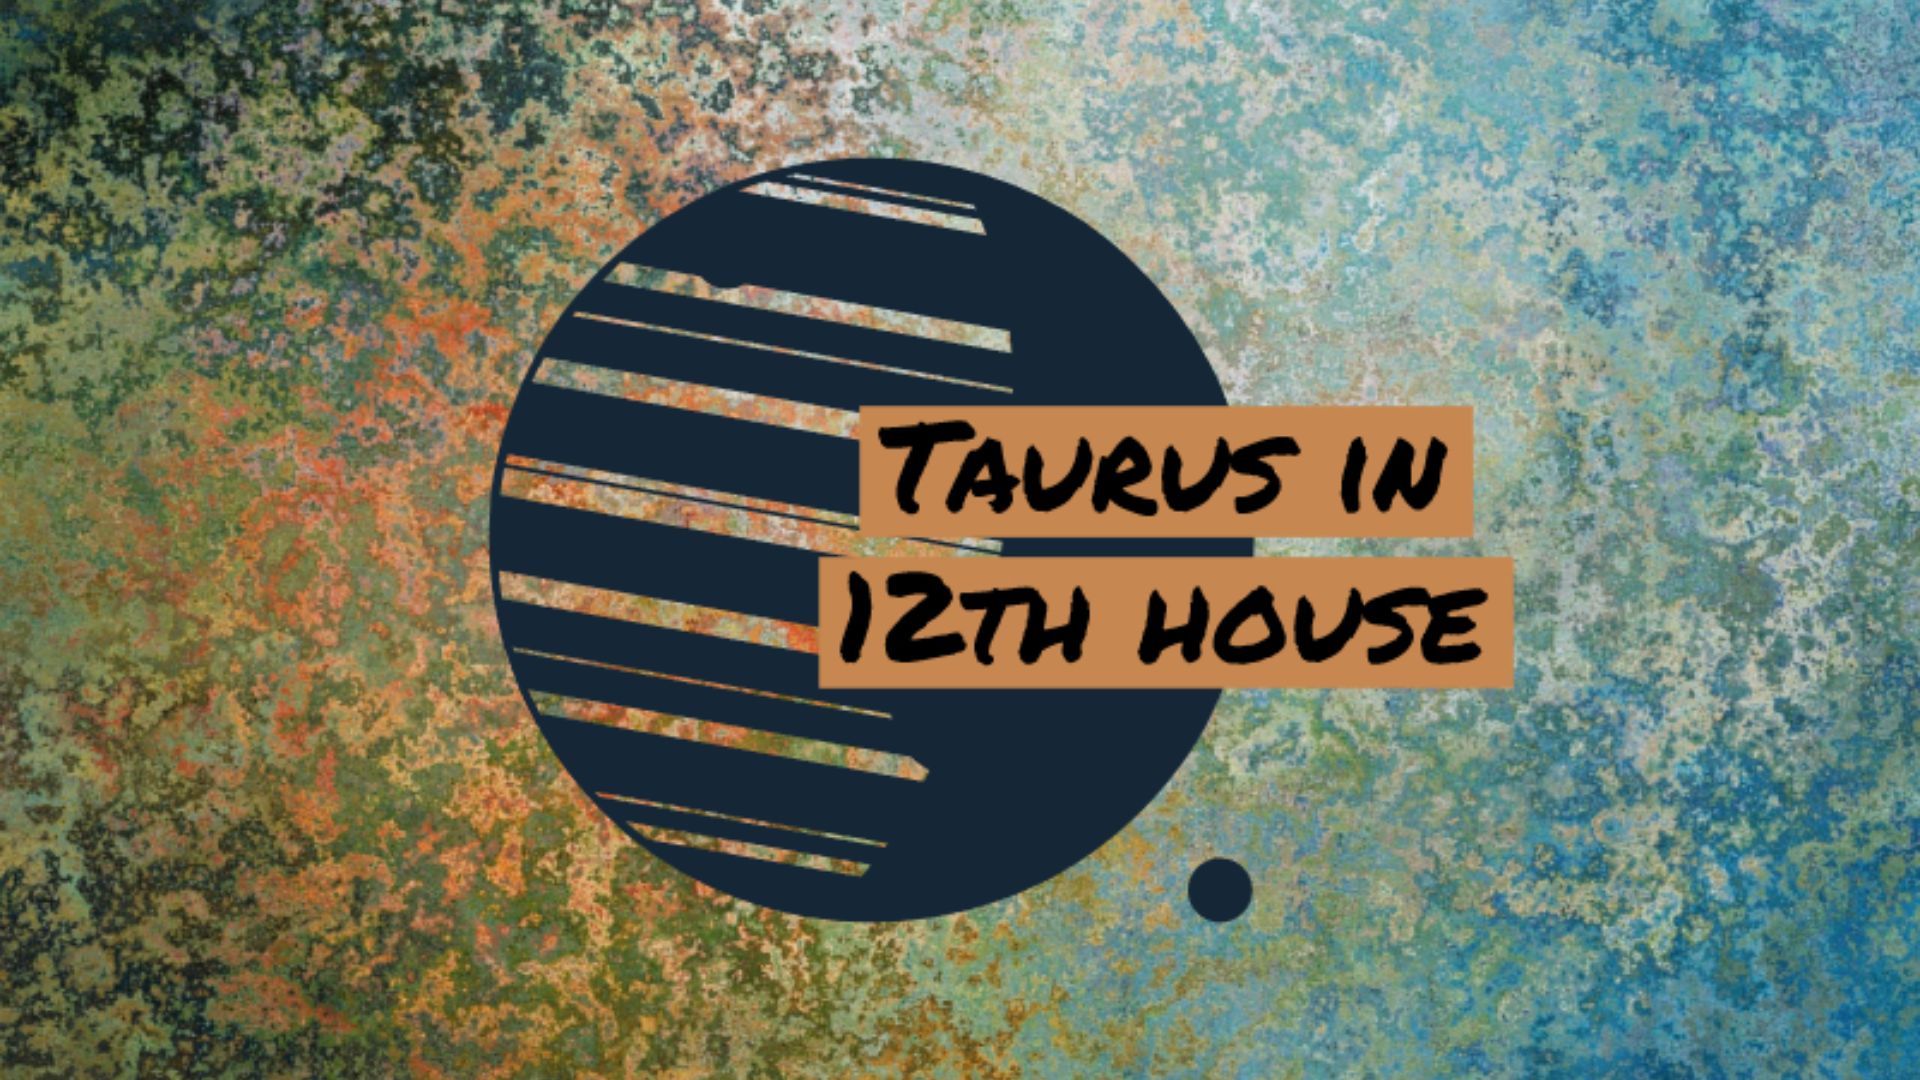 Taurus In 12th House written in a blue circle